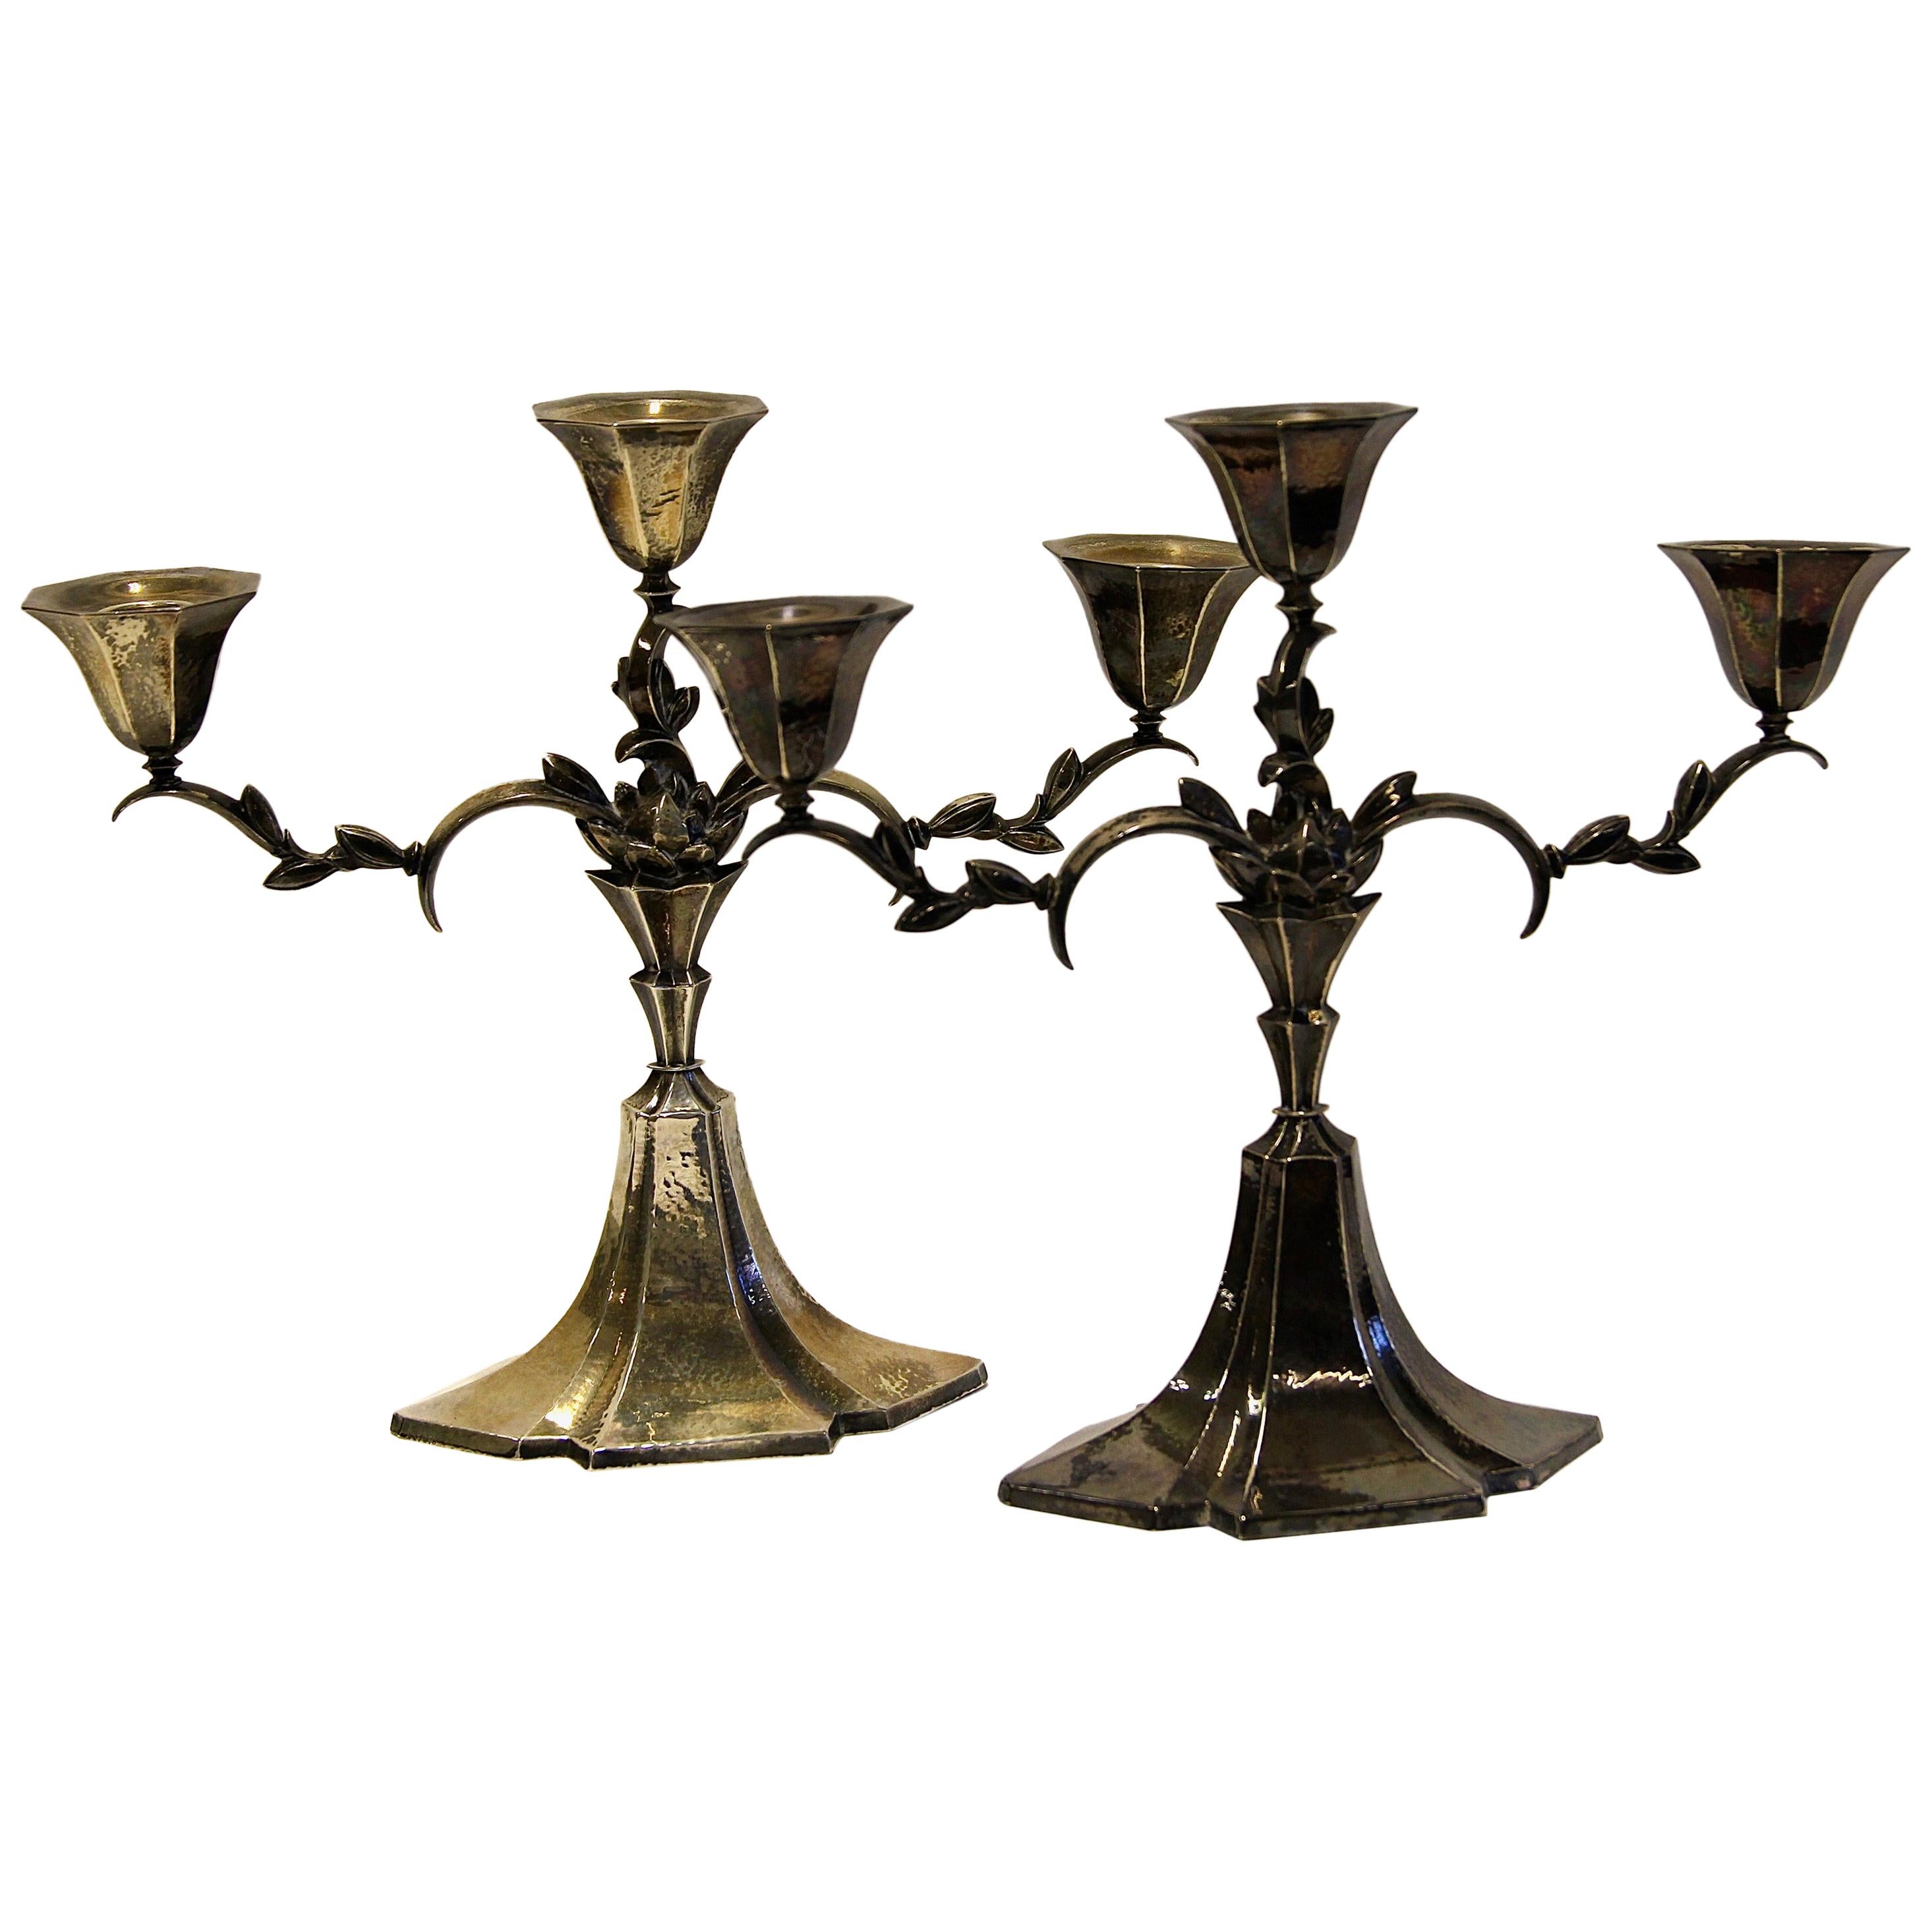 Pair of Antique Candlesticks, Each Three Arms, 925 Sterling Silver